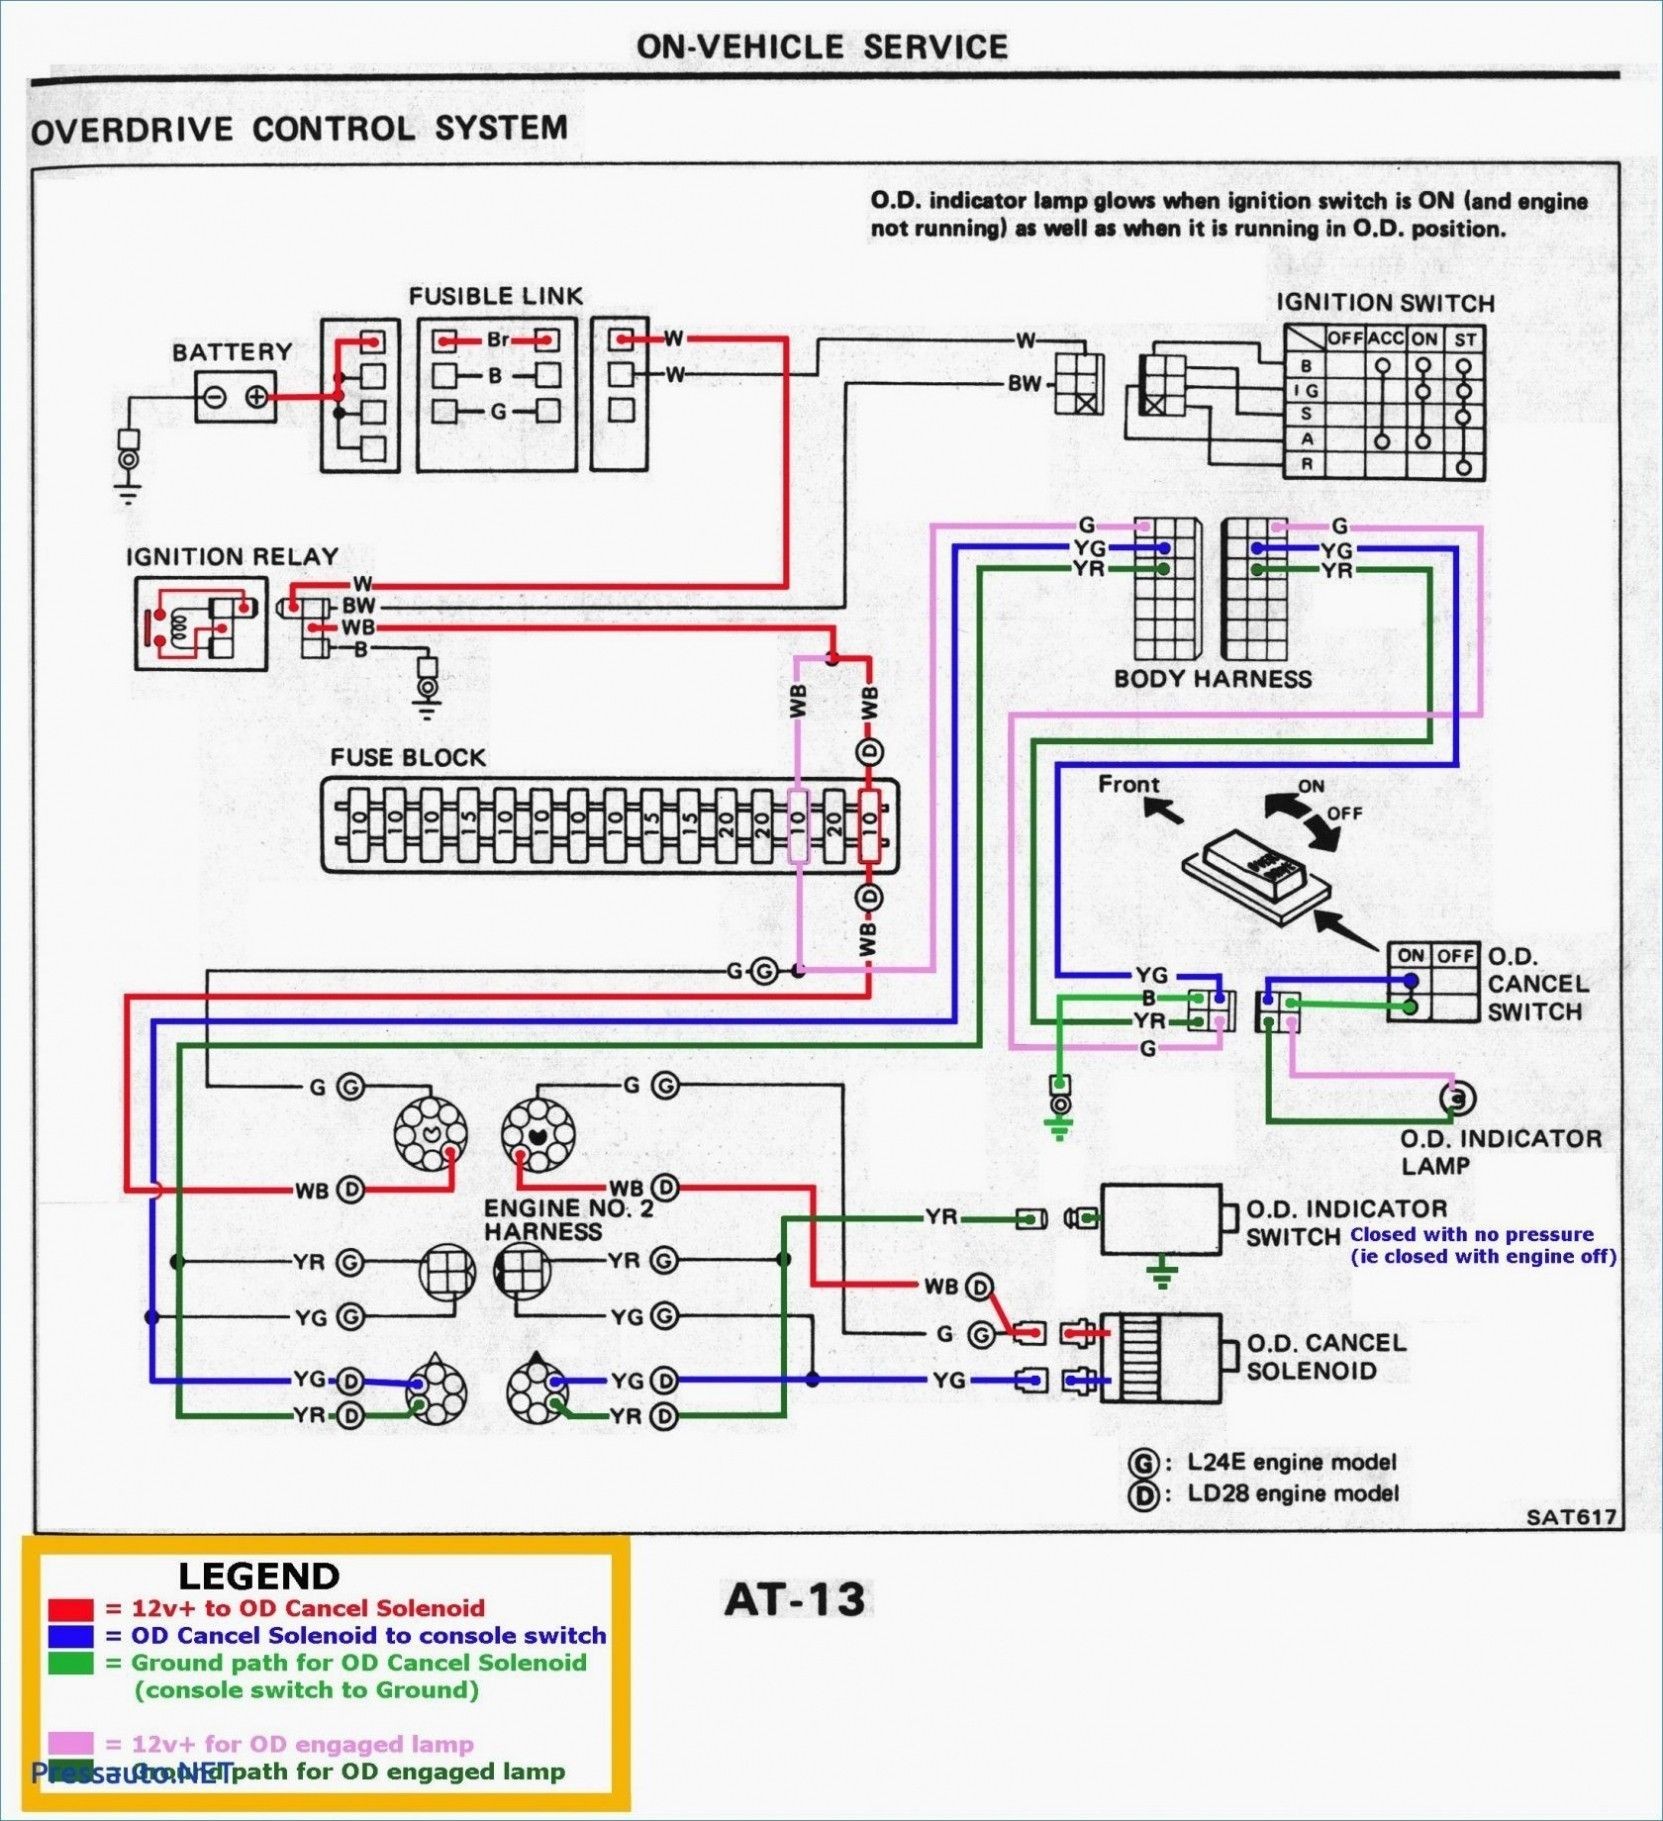 How to Wire A 3 Prong Flasher New Electrical Wiring Diagram toyota Avanza Of How to Wire A 3 Prong Flasher